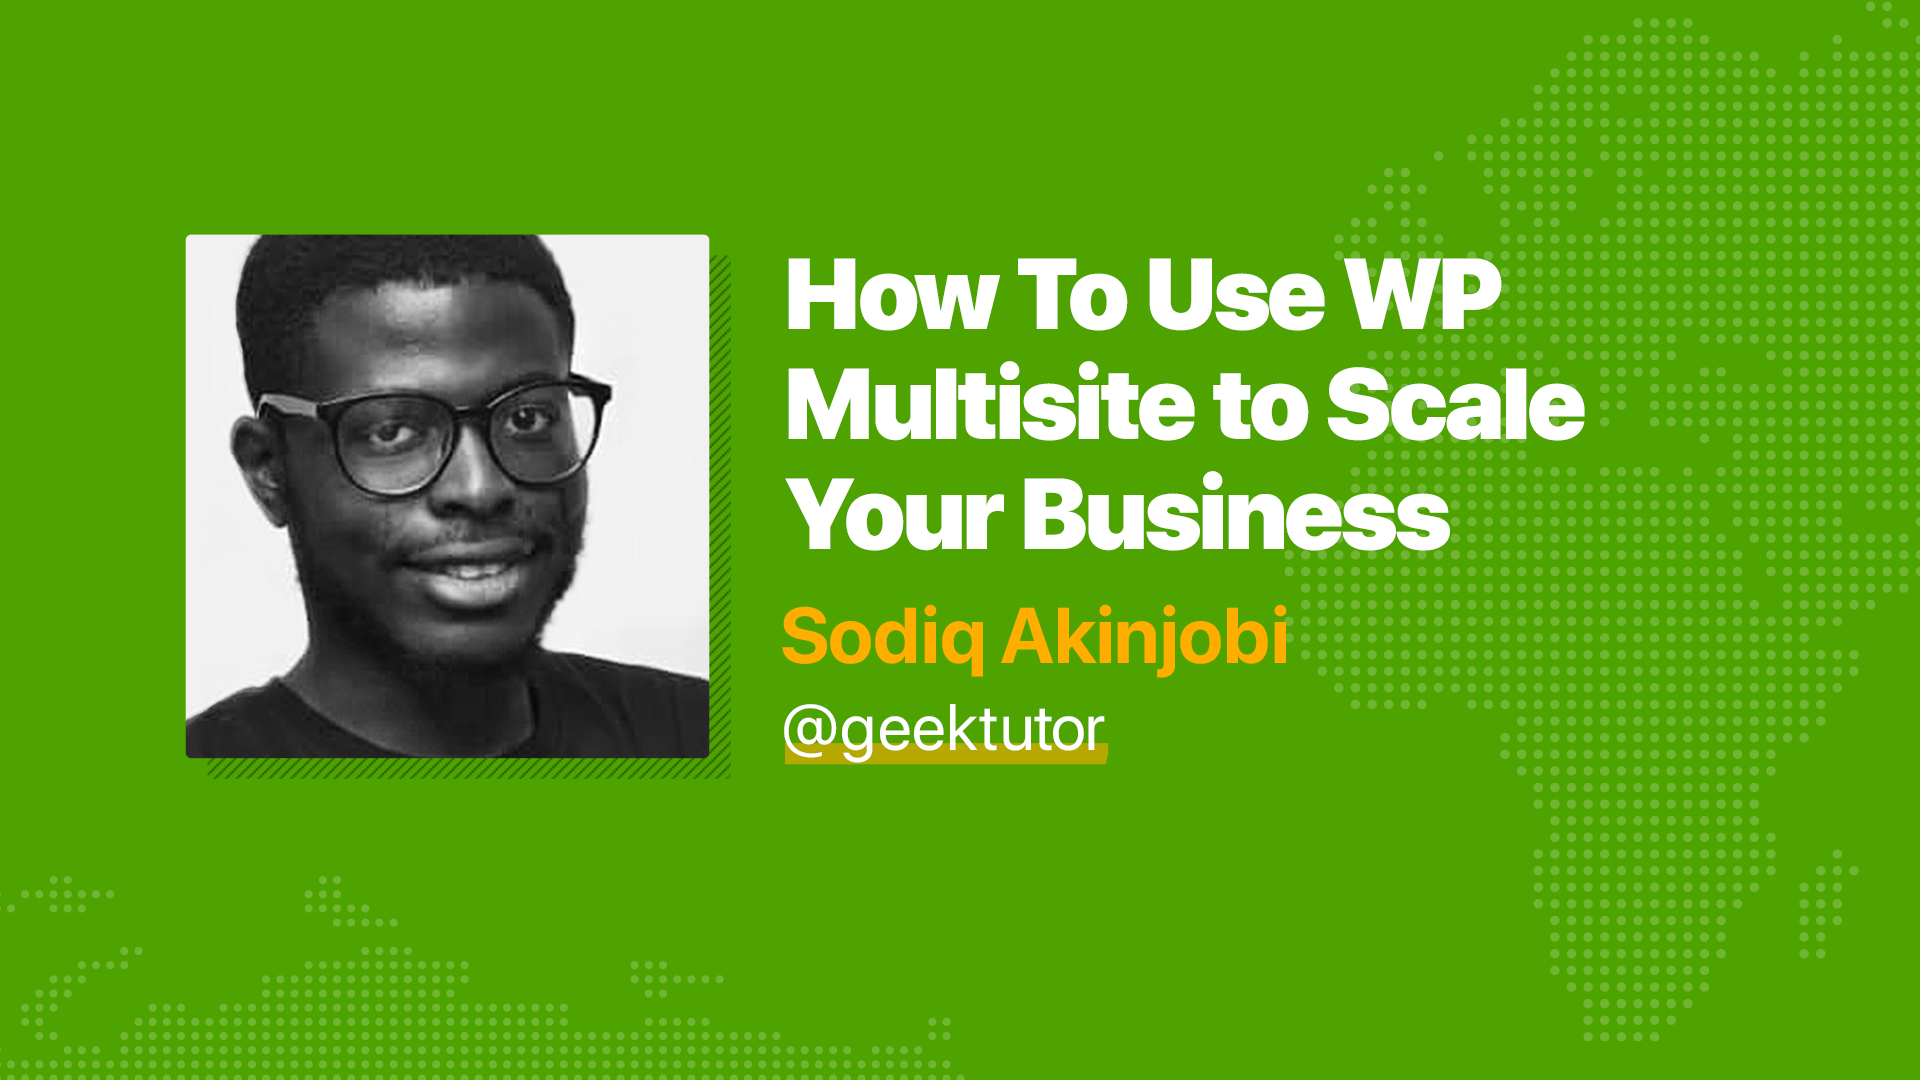 How to use WP Multisite to Sacle Your Business - Sodiq Akinjobi